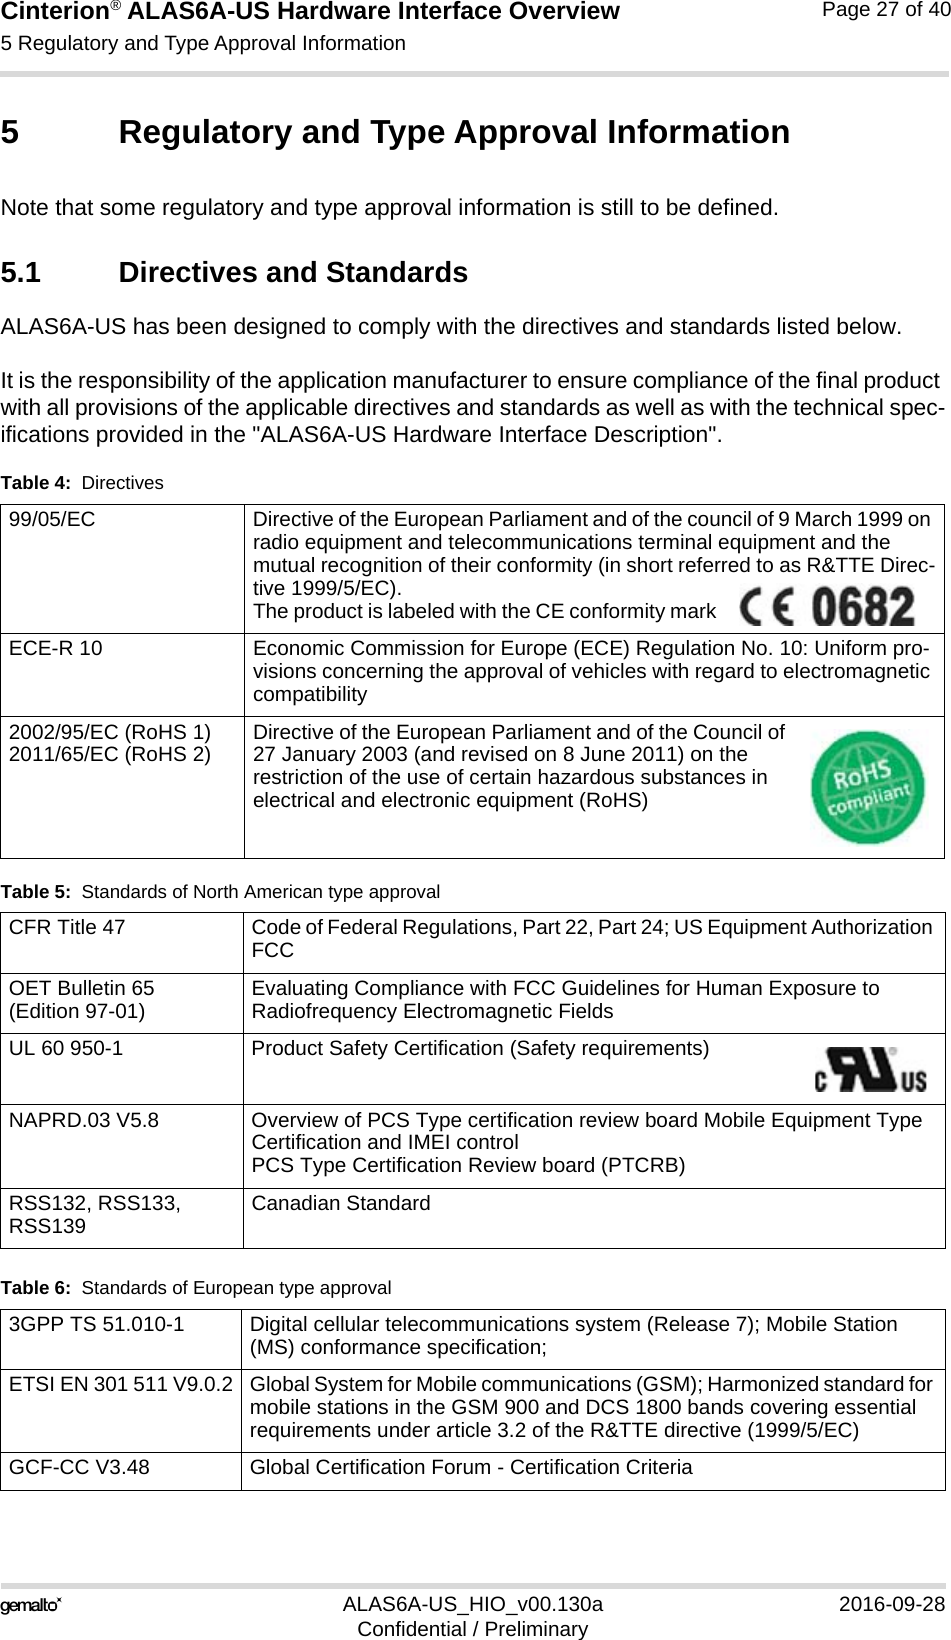 Cinterion® ALAS6A-US Hardware Interface Overview5 Regulatory and Type Approval Information33ALAS6A-US_HIO_v00.130a 2016-09-28Confidential / PreliminaryPage 27 of 405 Regulatory and Type Approval InformationNote that some regulatory and type approval information is still to be defined. 5.1 Directives and StandardsALAS6A-US has been designed to comply with the directives and standards listed below.It is the responsibility of the application manufacturer to ensure compliance of the final product with all provisions of the applicable directives and standards as well as with the technical spec-ifications provided in the &quot;ALAS6A-US Hardware Interface Description&quot;.Table 4:  Directives99/05/EC Directive of the European Parliament and of the council of 9 March 1999 on radio equipment and telecommunications terminal equipment and the mutual recognition of their conformity (in short referred to as R&amp;TTE Direc-tive 1999/5/EC).The product is labeled with the CE conformity mark   ECE-R 10 Economic Commission for Europe (ECE) Regulation No. 10: Uniform pro-visions concerning the approval of vehicles with regard to electromagnetic compatibility2002/95/EC (RoHS 1)2011/65/EC (RoHS 2) Directive of the European Parliament and of the Council of 27 January 2003 (and revised on 8 June 2011) on the restriction of the use of certain hazardous substances in electrical and electronic equipment (RoHS)Table 5:  Standards of North American type approvalCFR Title 47 Code of Federal Regulations, Part 22, Part 24; US Equipment Authorization FCCOET Bulletin 65(Edition 97-01) Evaluating Compliance with FCC Guidelines for Human Exposure to Radiofrequency Electromagnetic FieldsUL 60 950-1 Product Safety Certification (Safety requirements) NAPRD.03 V5.8 Overview of PCS Type certification review board Mobile Equipment Type Certification and IMEI controlPCS Type Certification Review board (PTCRB)RSS132, RSS133, RSS139 Canadian StandardTable 6:  Standards of European type approval3GPP TS 51.010-1 Digital cellular telecommunications system (Release 7); Mobile Station (MS) conformance specification;ETSI EN 301 511 V9.0.2 Global System for Mobile communications (GSM); Harmonized standard for mobile stations in the GSM 900 and DCS 1800 bands covering essential requirements under article 3.2 of the R&amp;TTE directive (1999/5/EC)GCF-CC V3.48  Global Certification Forum - Certification Criteria